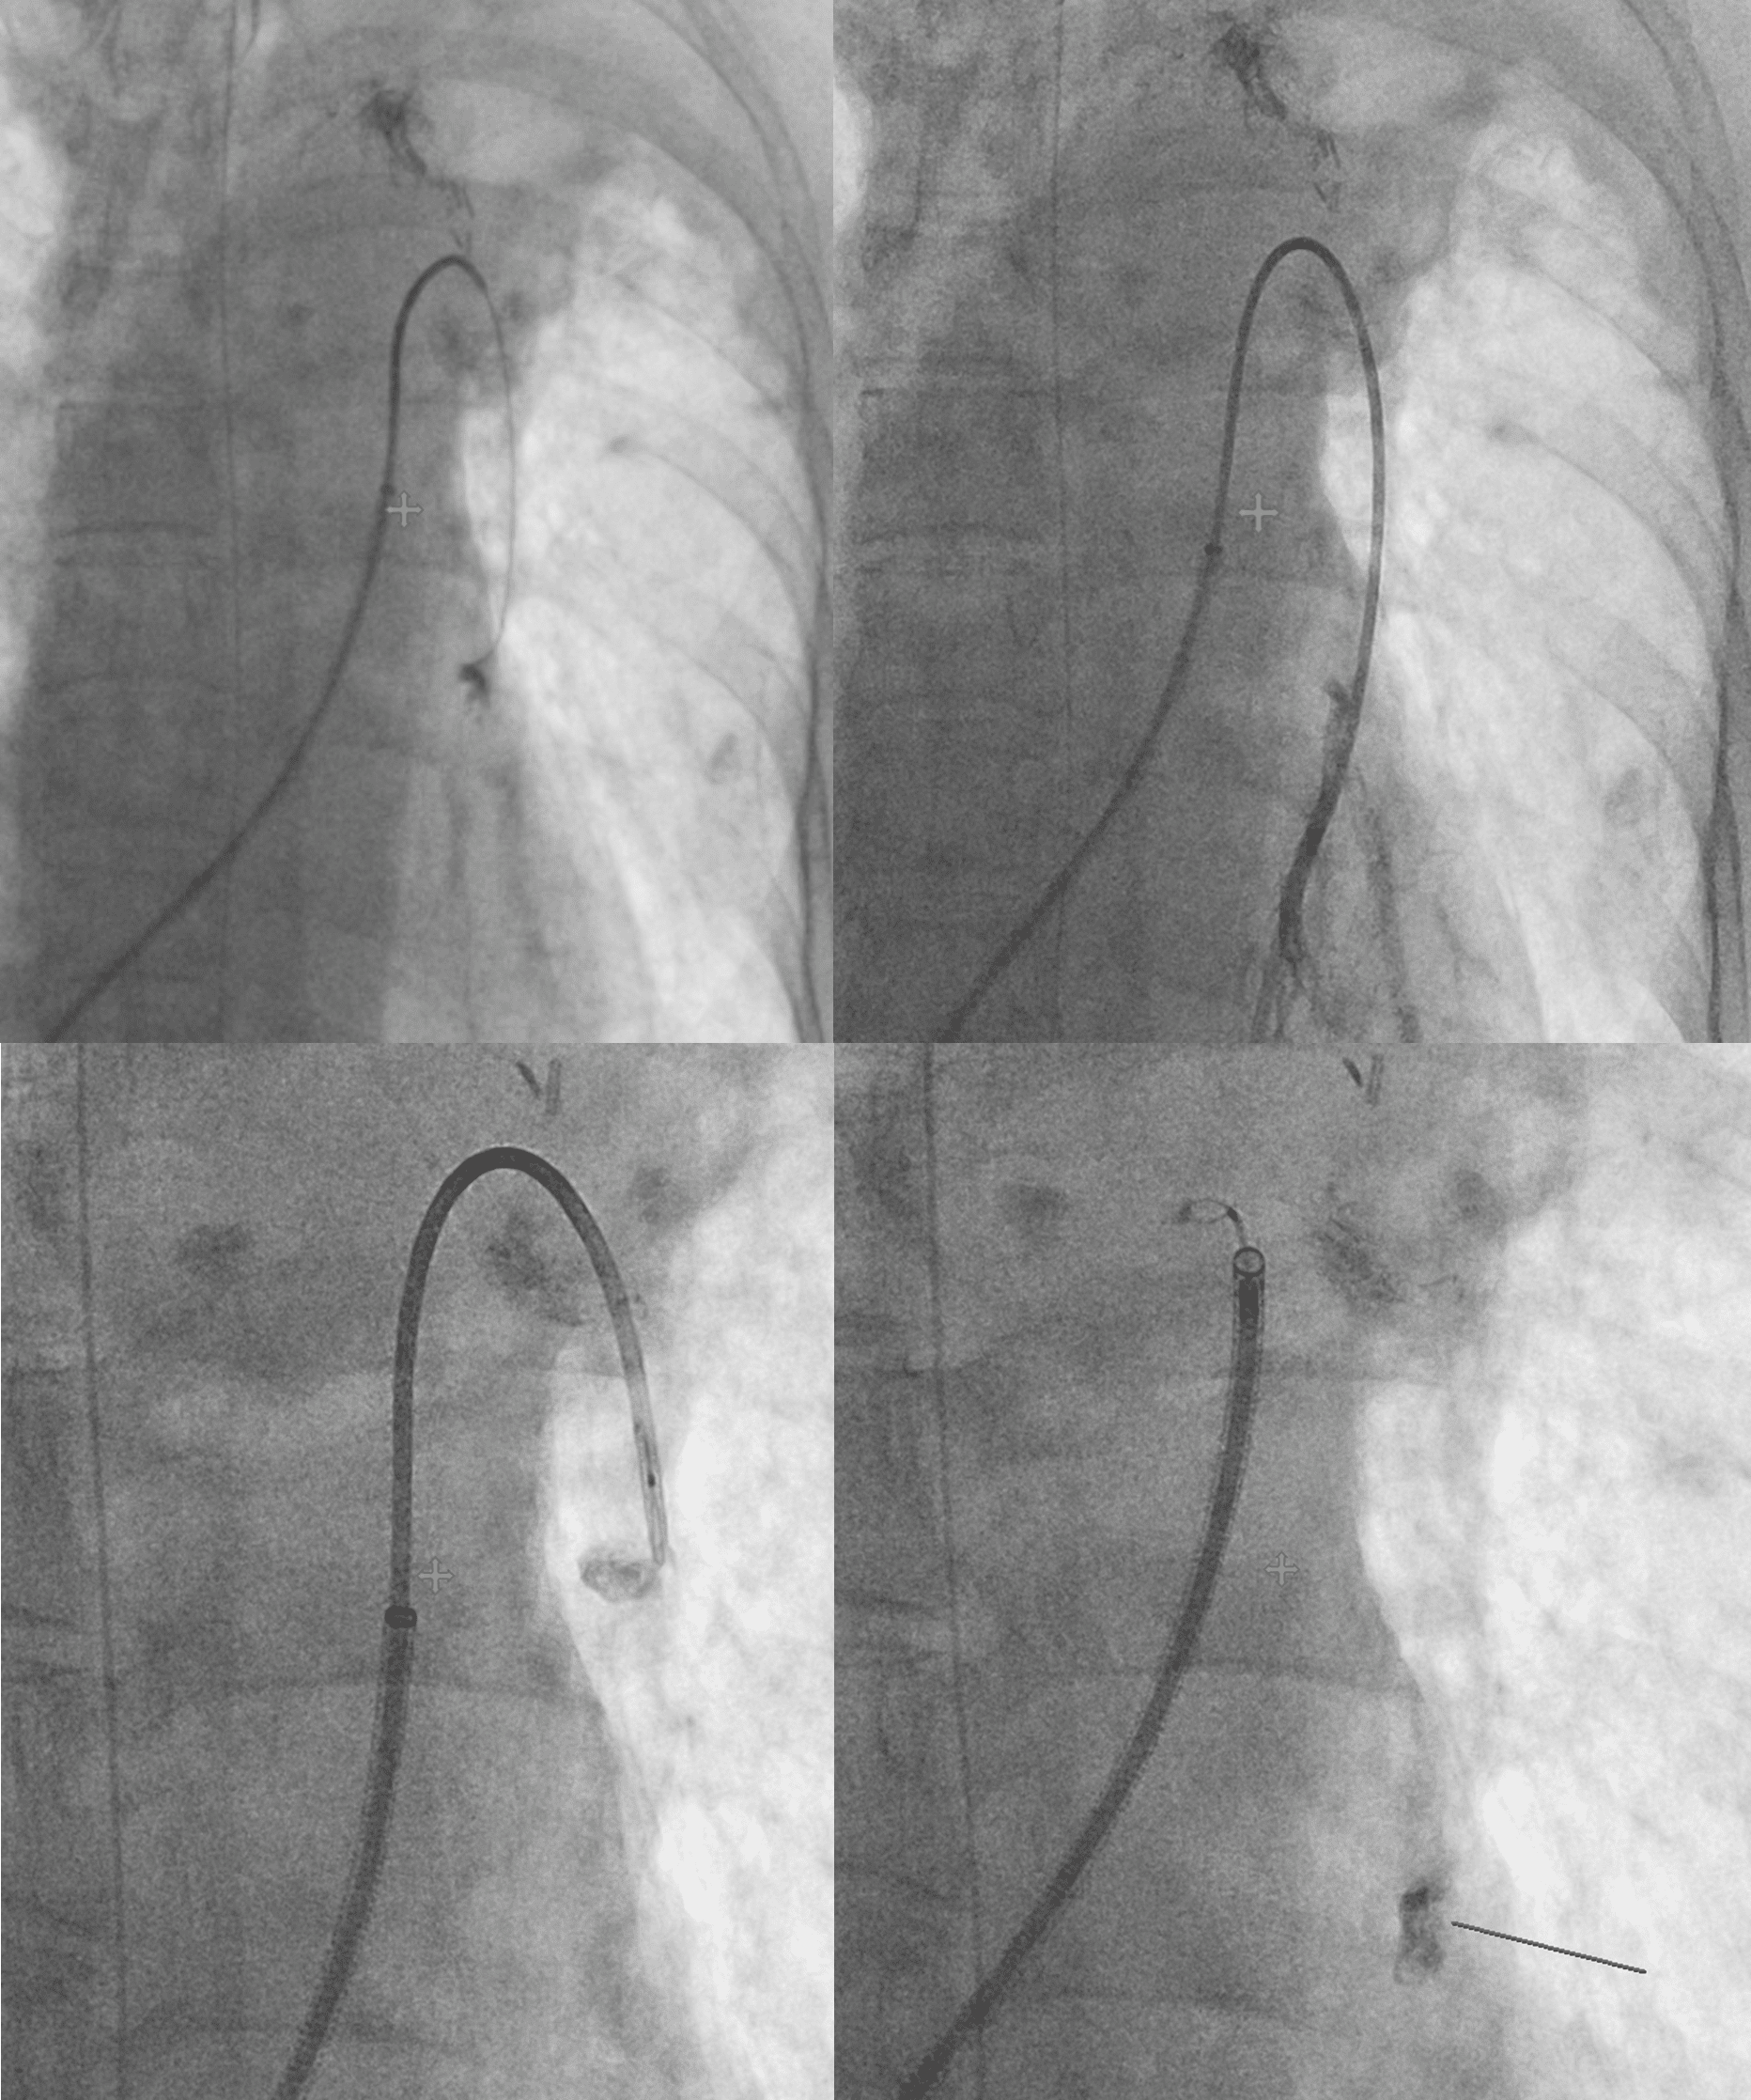 Today’s case 6 – Pulmonary artery aneurysm embolization (How to remove the glue cast which migrated into unwanted vessel)